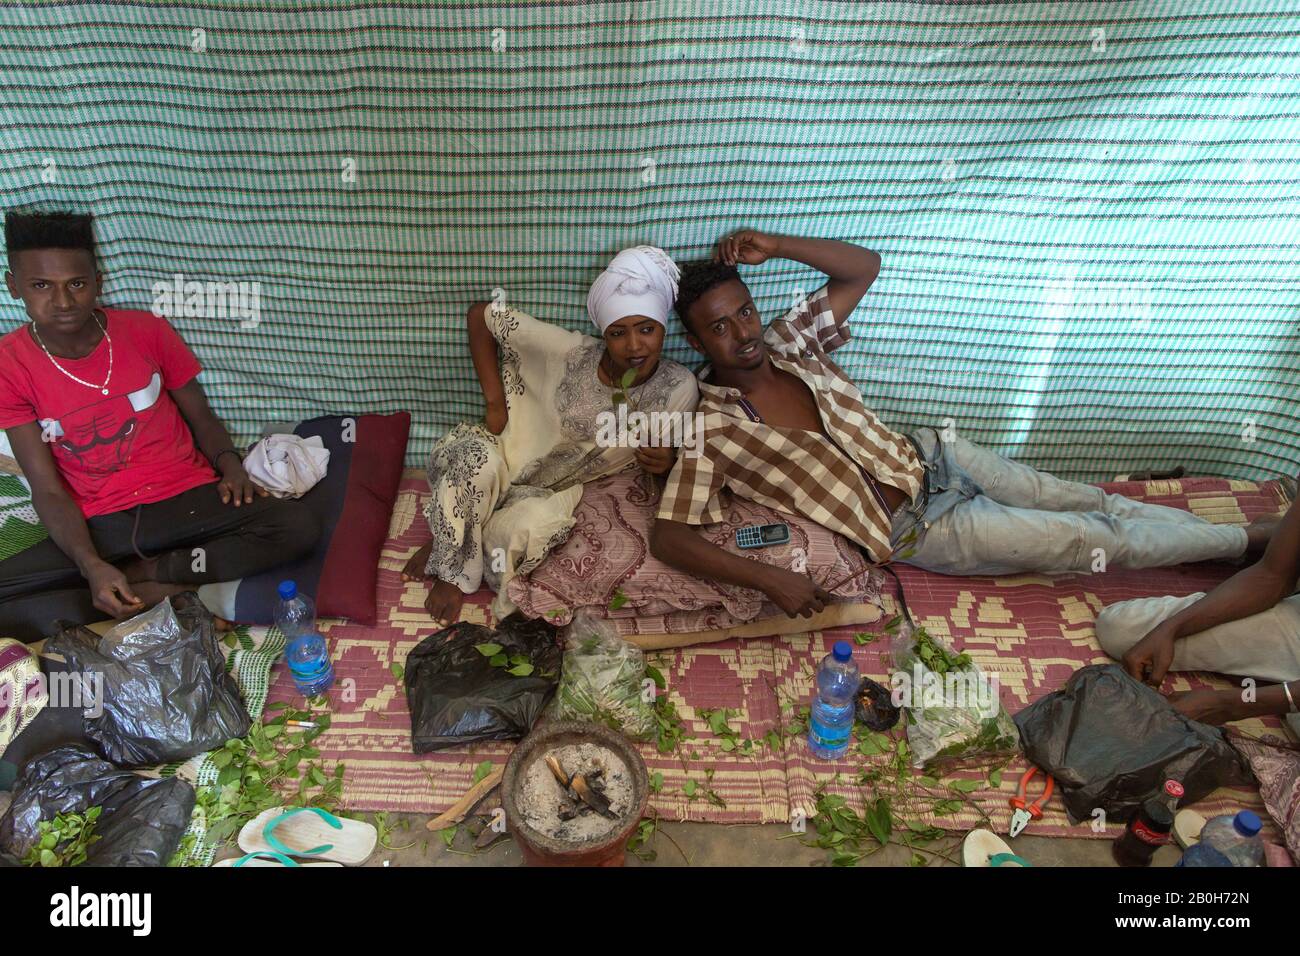 02.11.2019, Adama, Oromiyaa, Ethiopia - A woman and two men are sitting on the floor chewing khat. 8000 IDPs from the Somalia region live in four refu Stock Photo